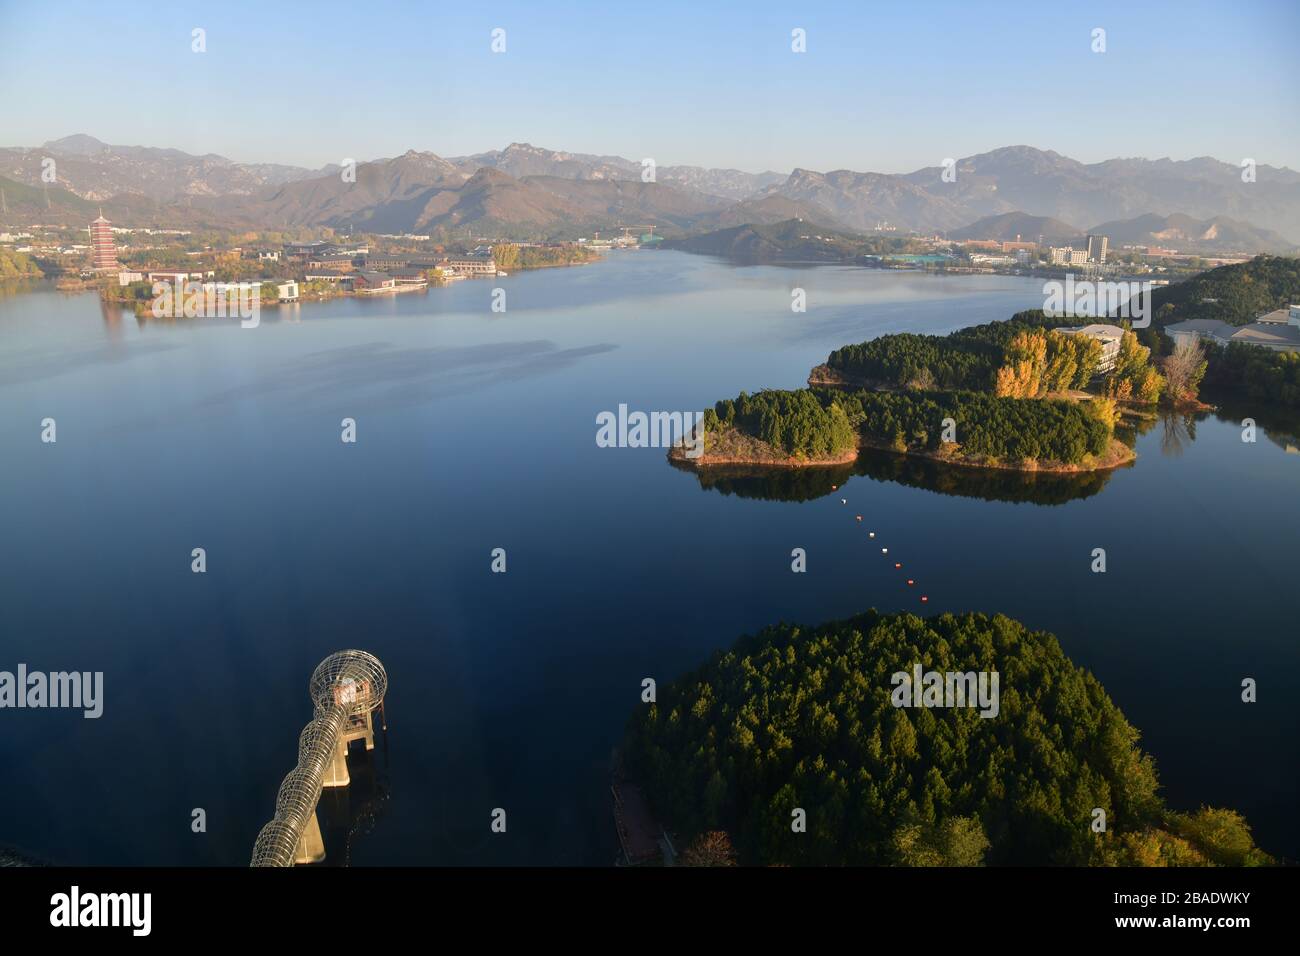 Bird’s eye view of Yanqi Lake with its tranquil waters, the large pagoda on the other side of the lake and portions of the great wall of China barely Stock Photo